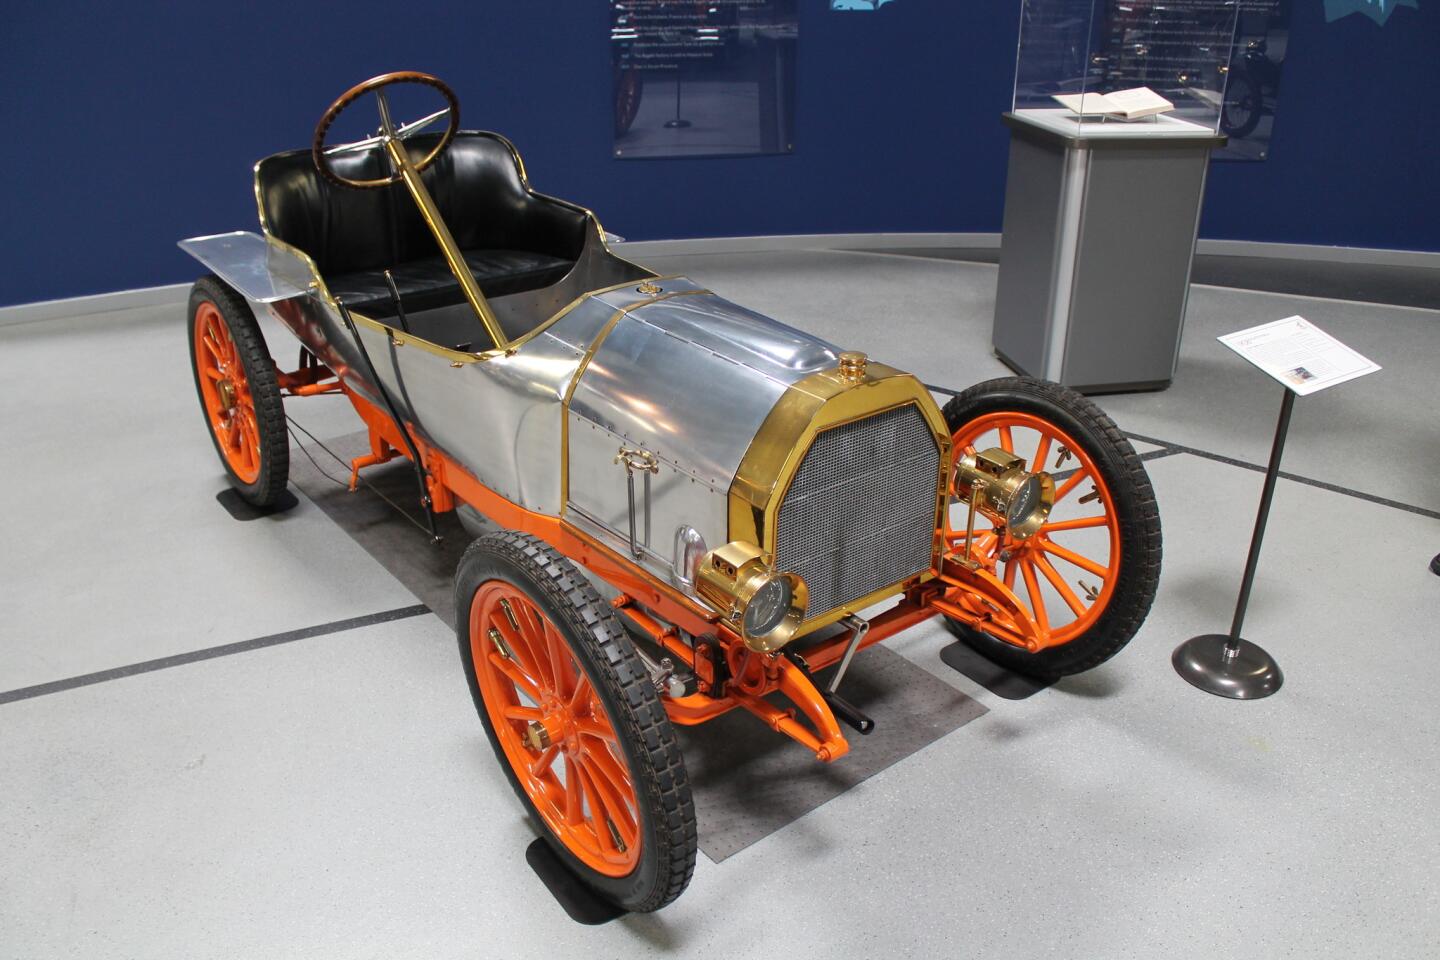 The first Bugatti car ever built, a lightweight prototype from 1908 called the Type 10.